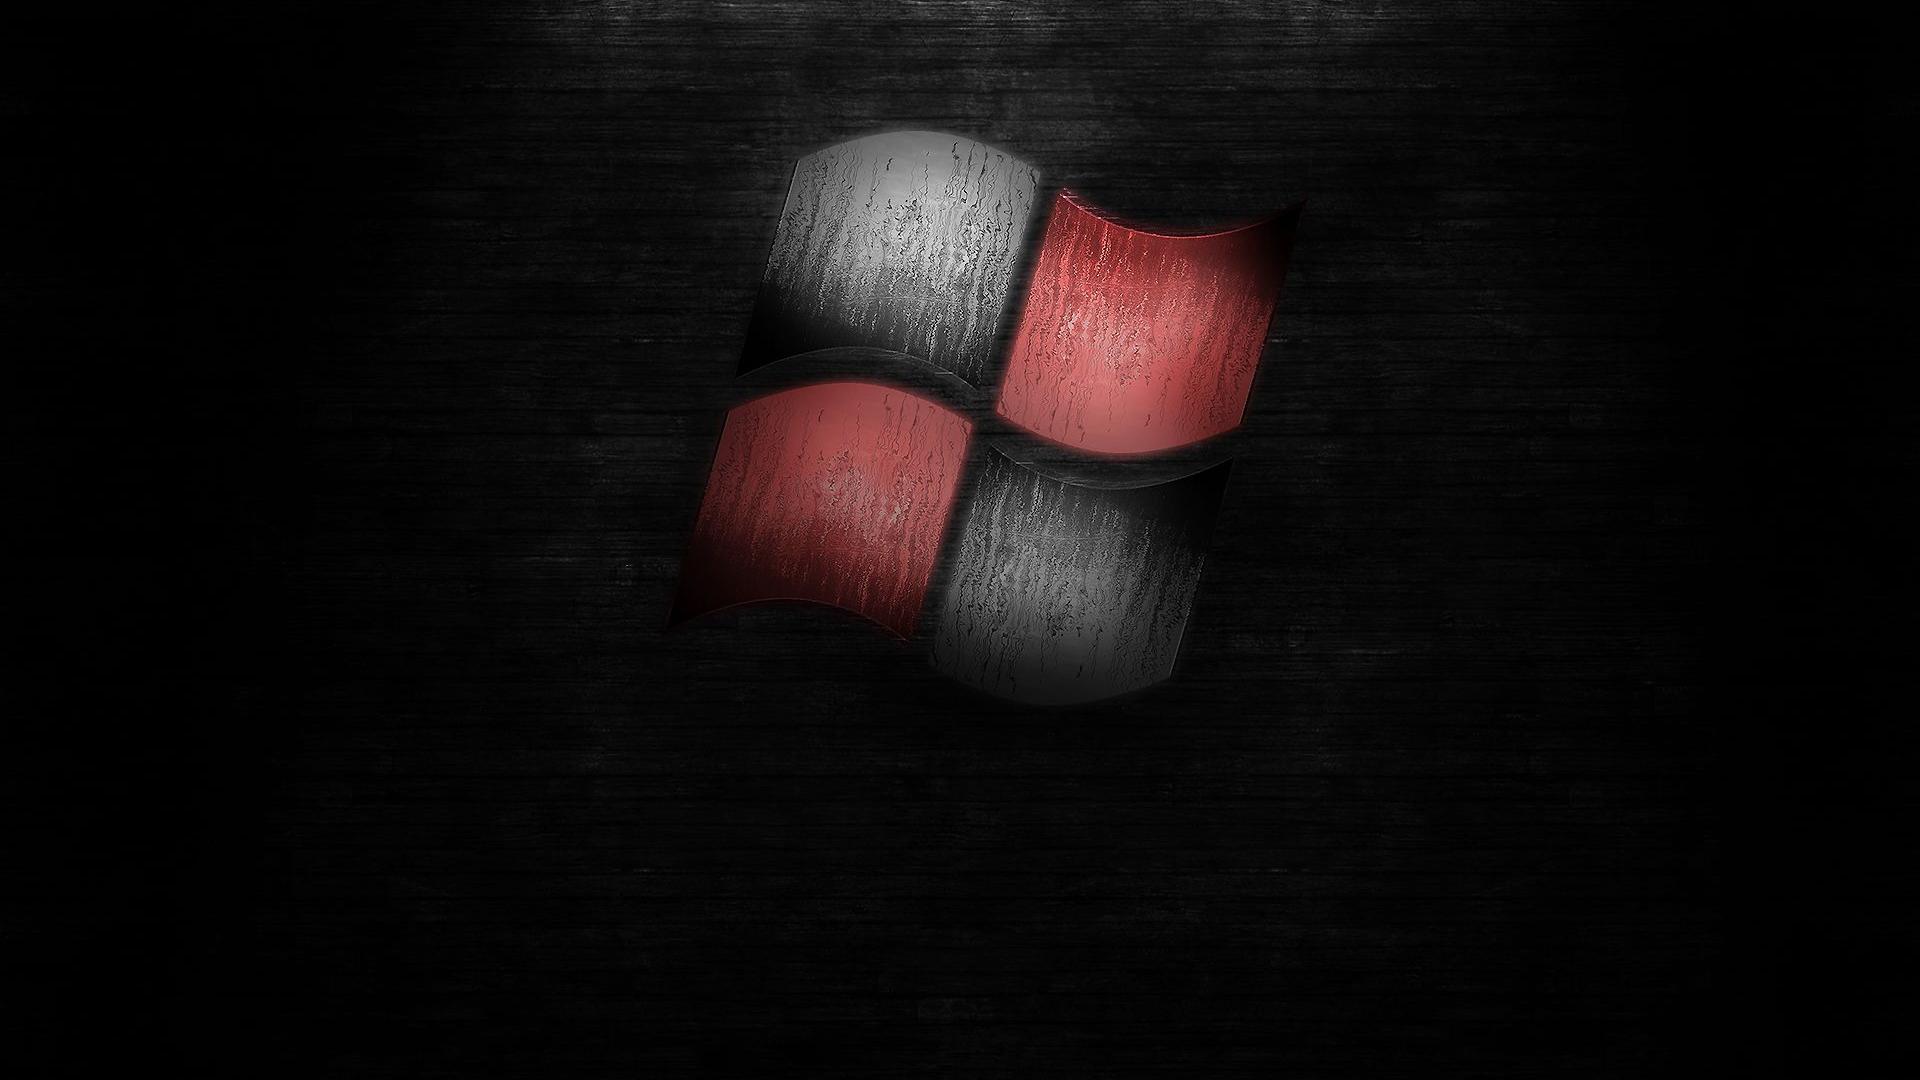 Windows Wallpaper Black And Red